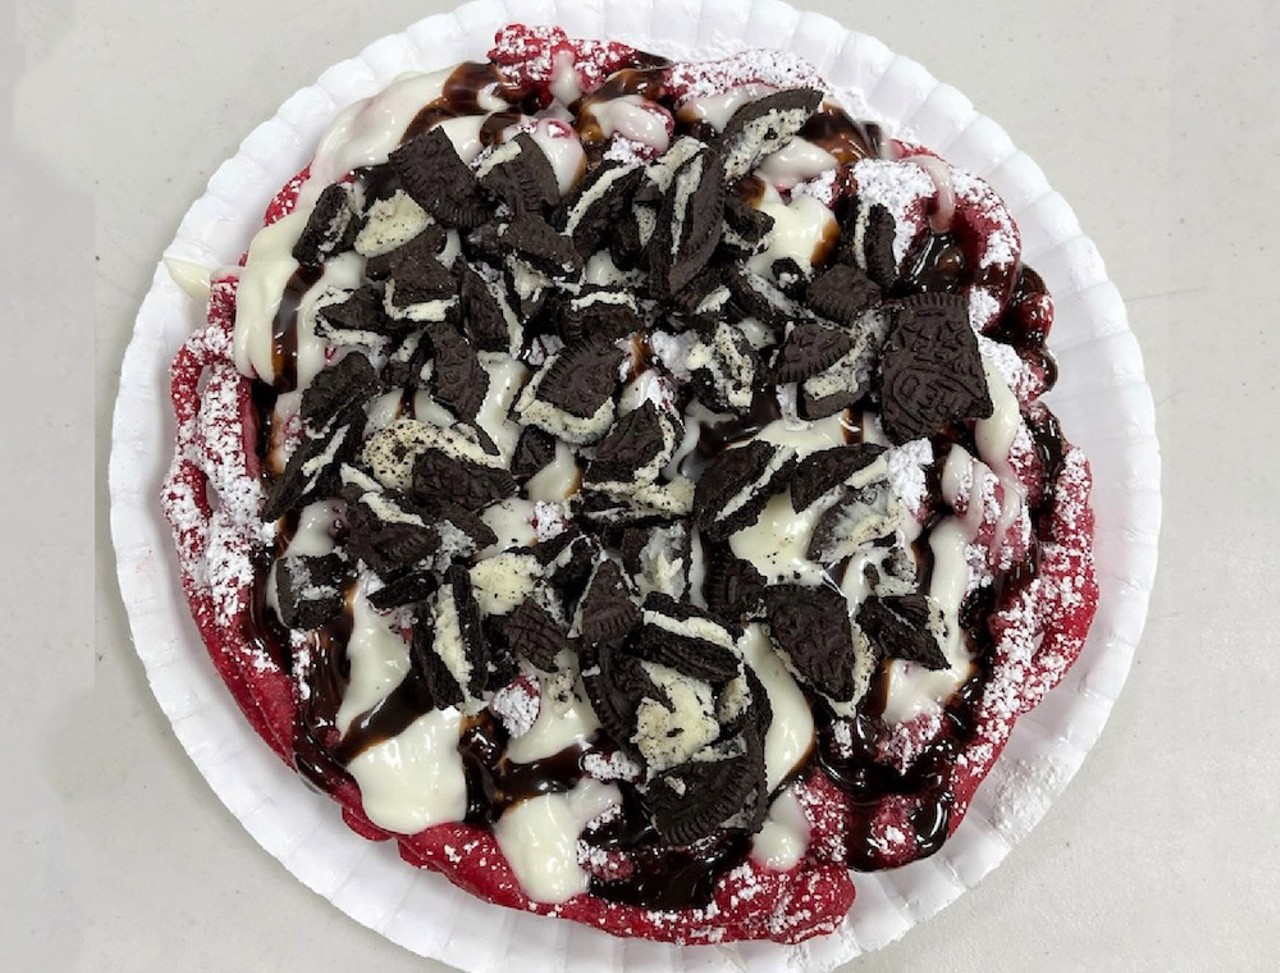 Cookies & Cream Funnel Cake           
"Red Velvet Cookies and Cream funnel cake with a fudge drizzle."                        
Where to find it: Paulette's Food